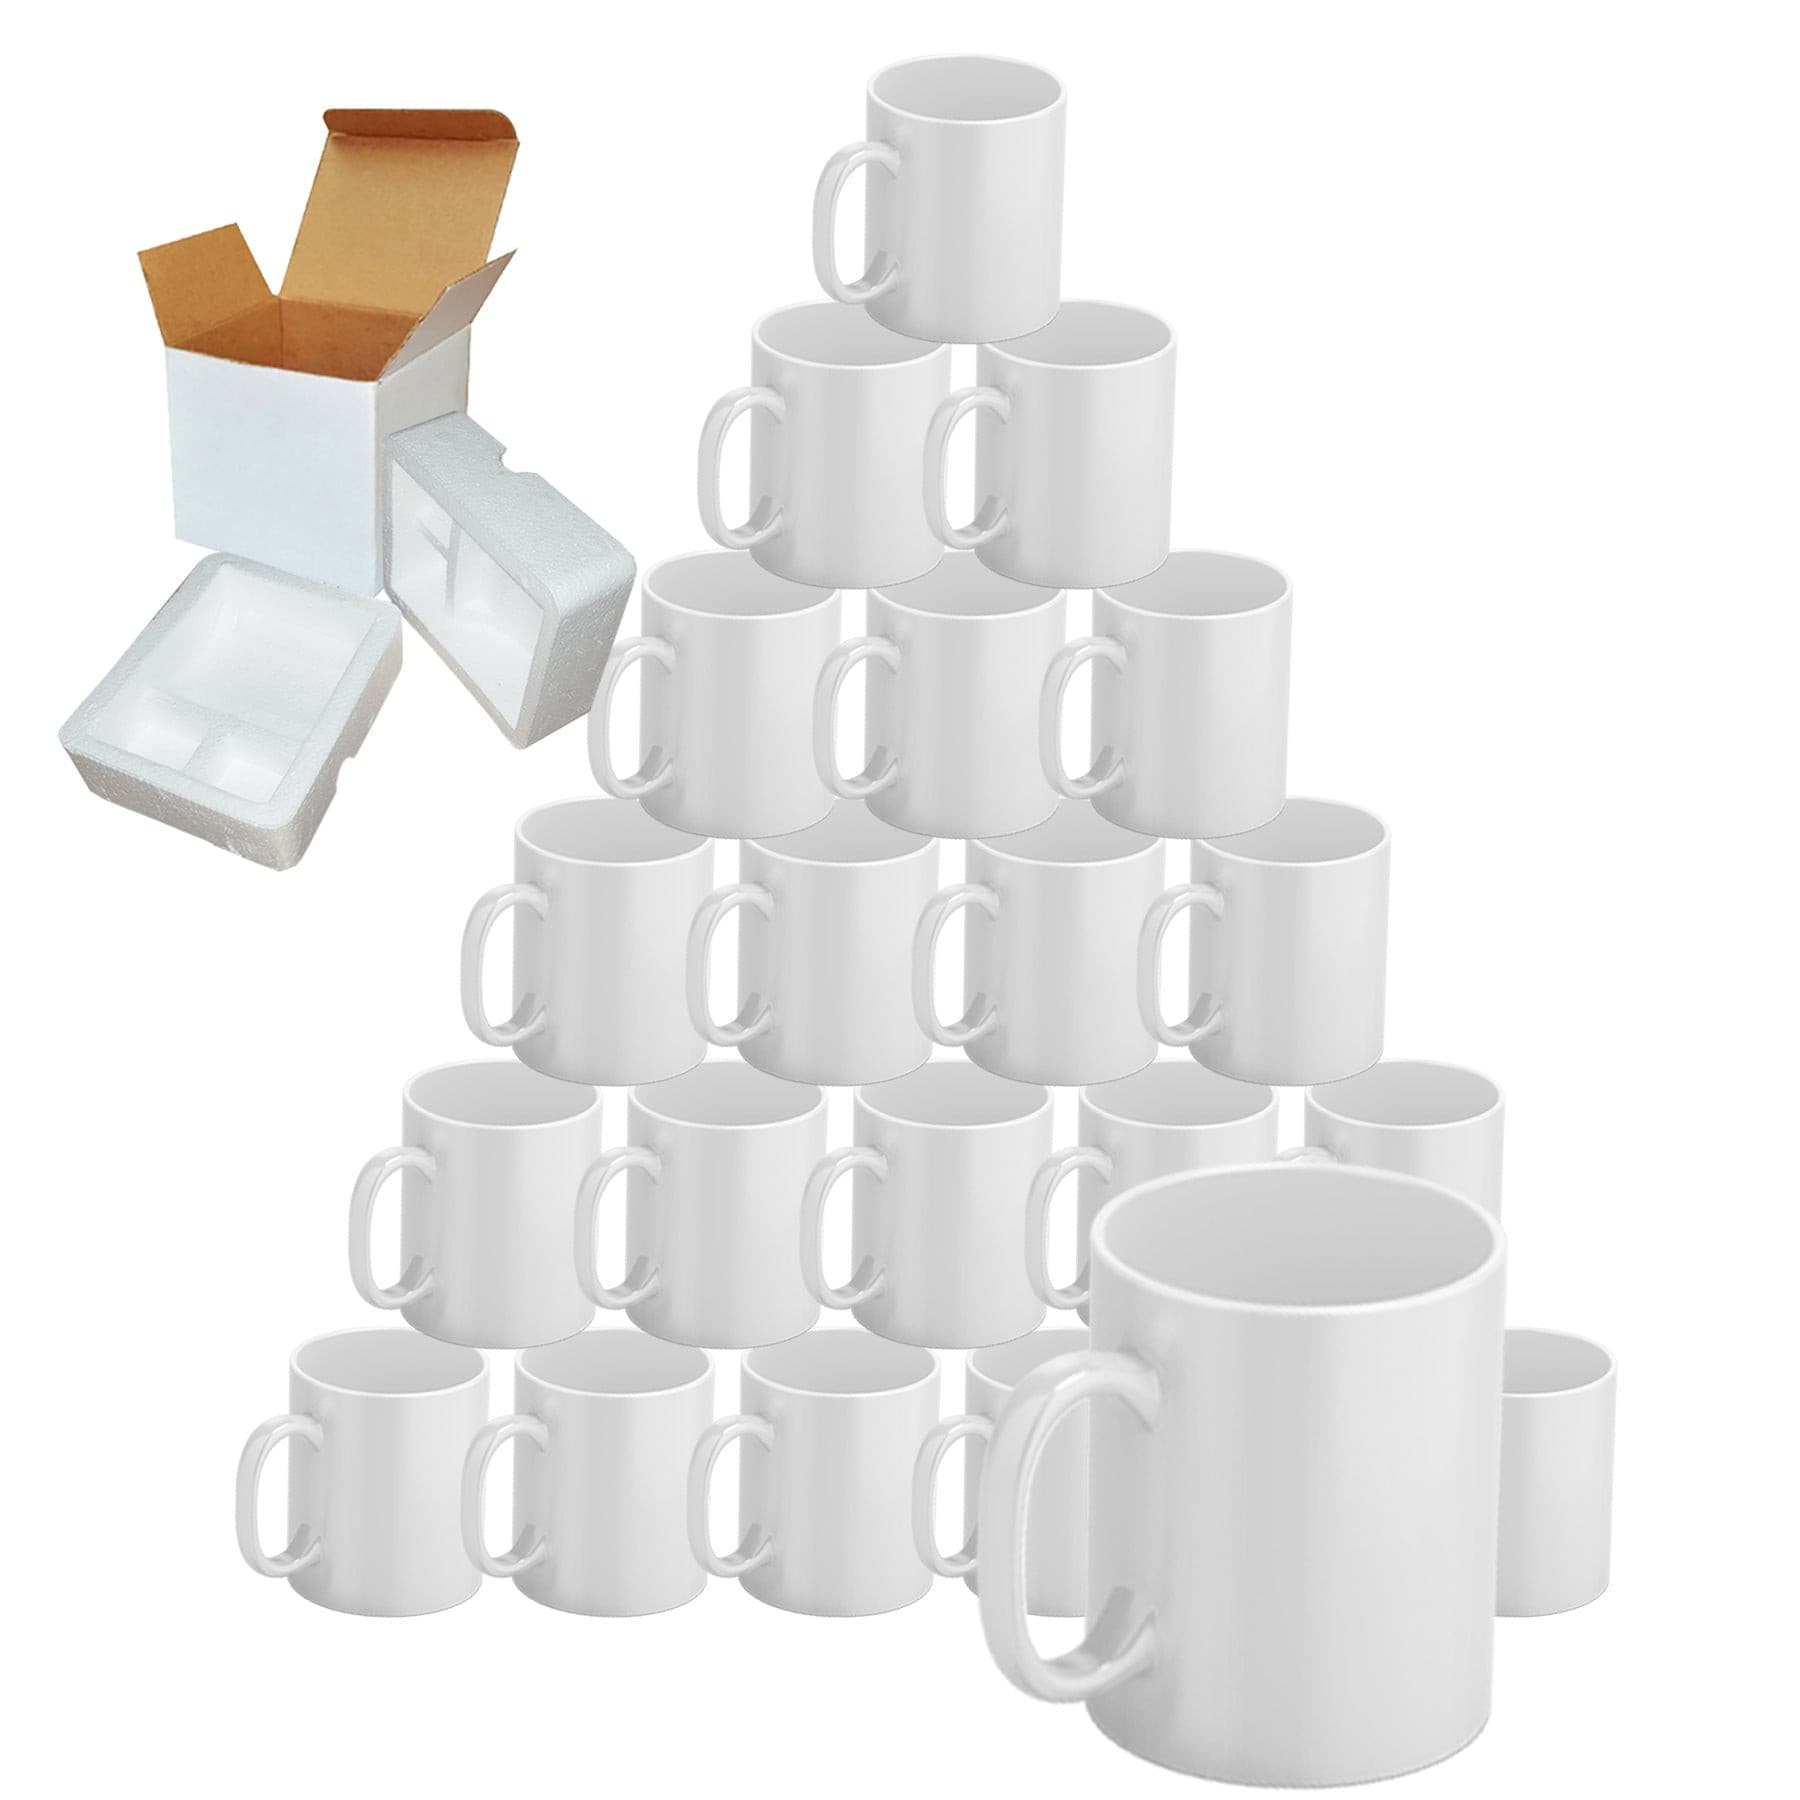 3.5 x 9 Sublimation Paper for 11oz Coffee Mugs - Compatible with